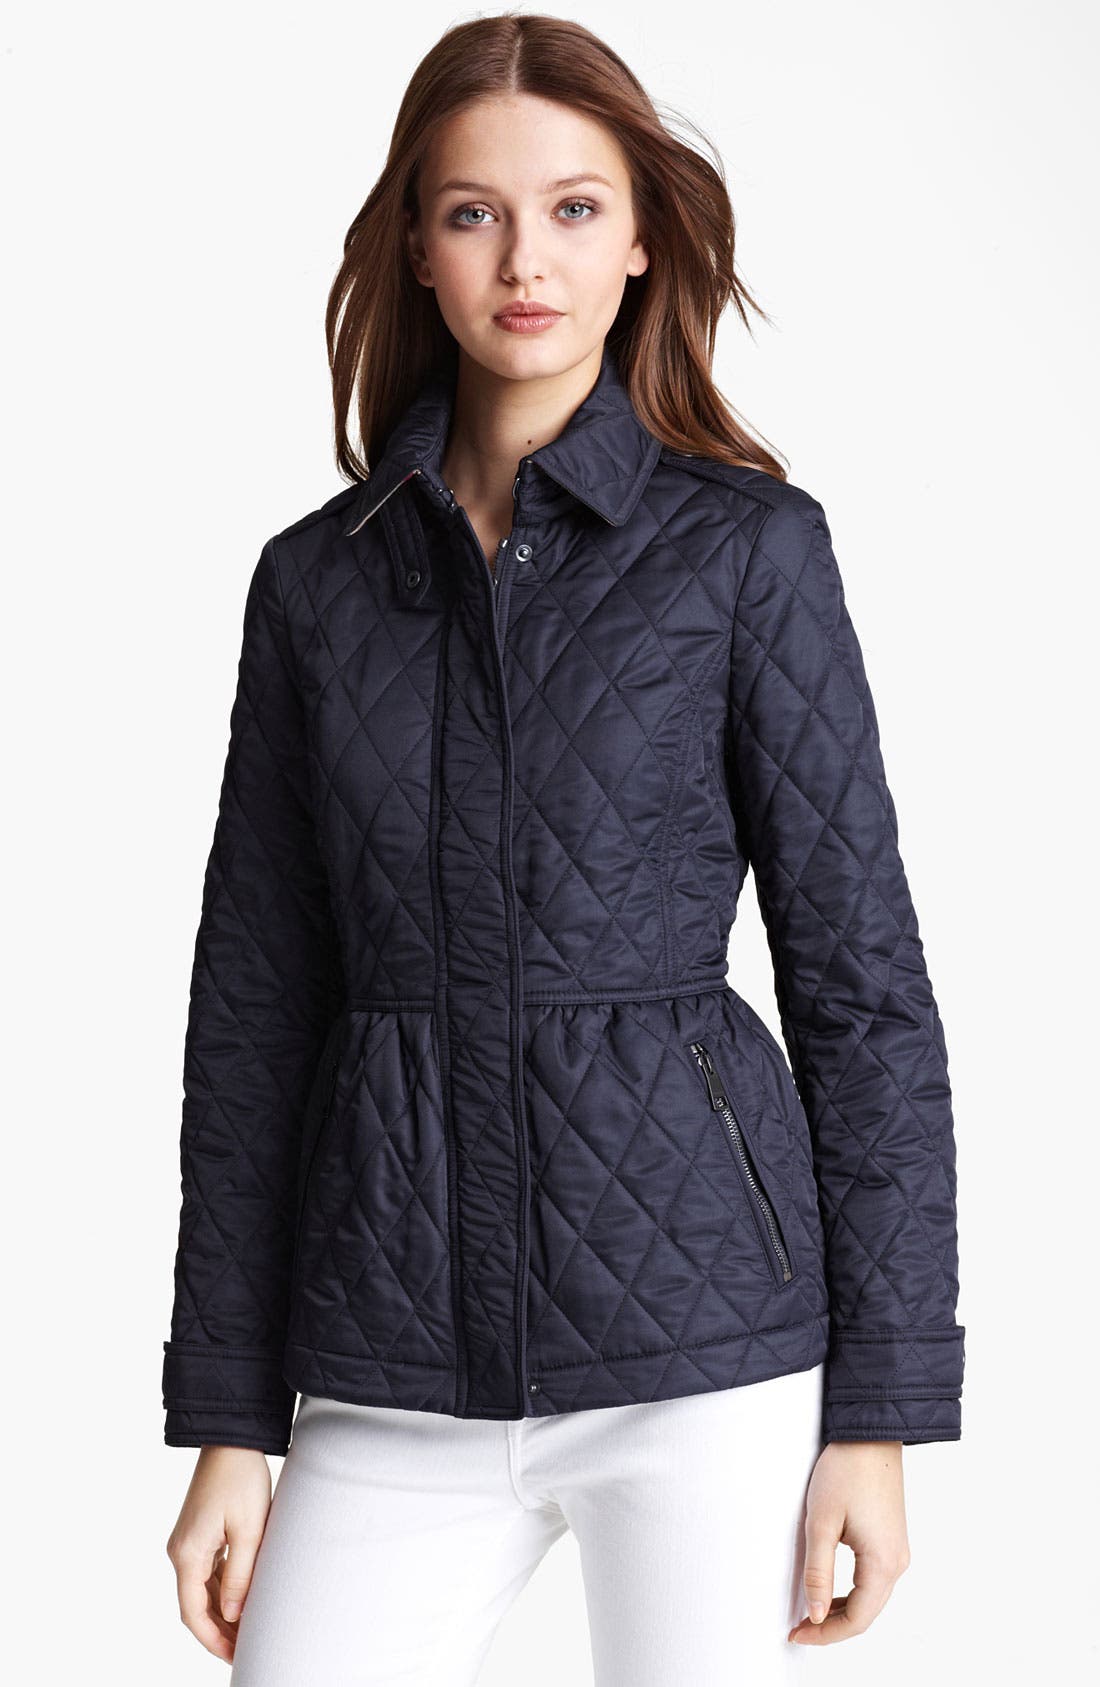 Burberry Brit 'Oakleigh' Quilted Jacket 